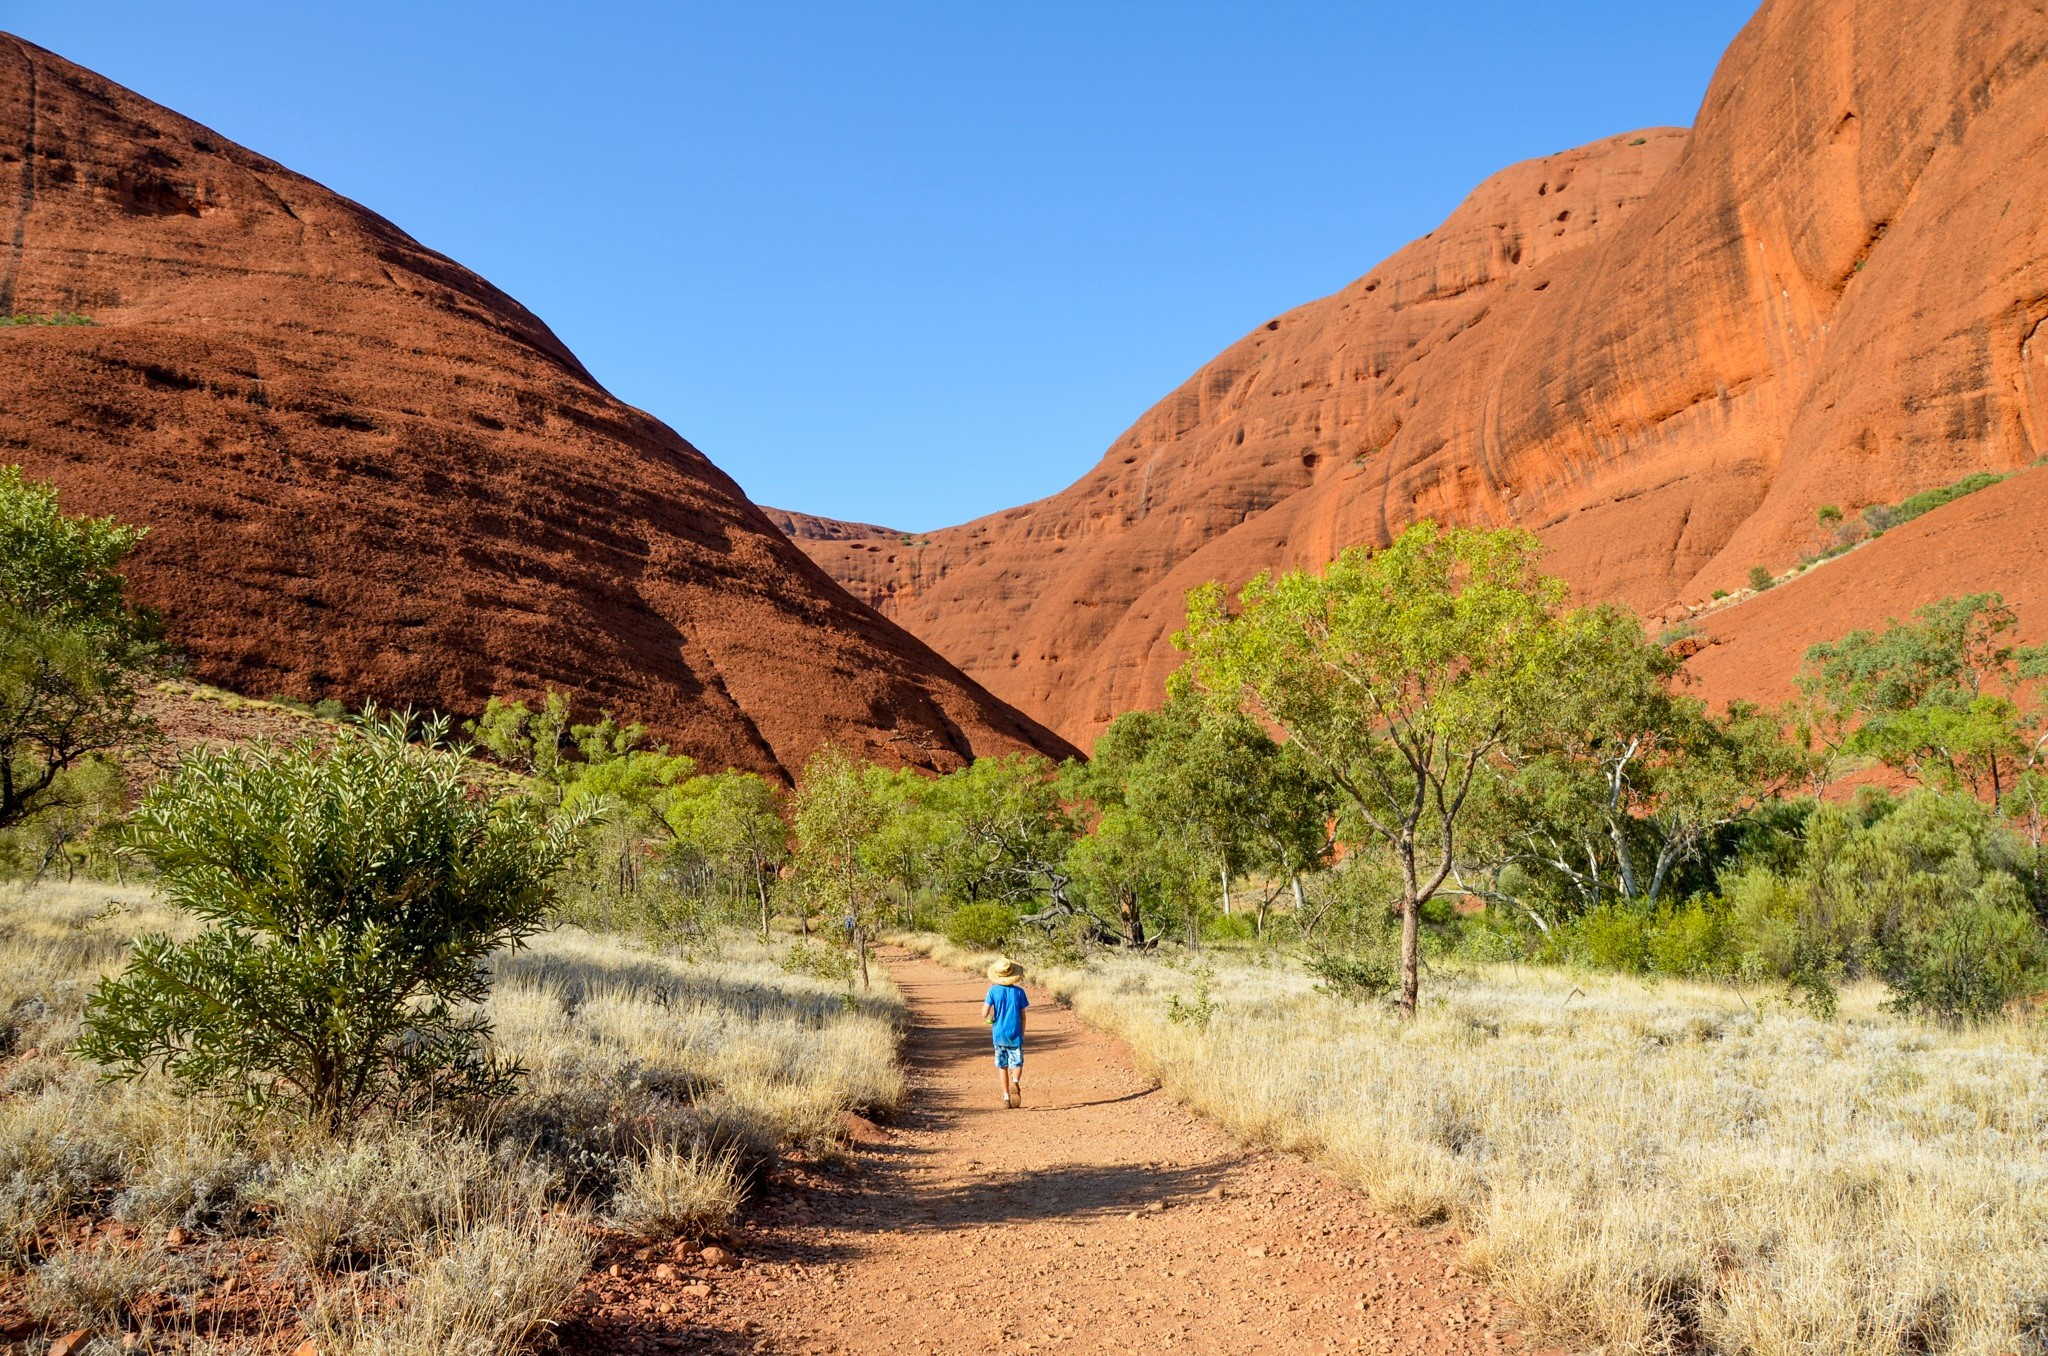 A person hiking in the Olgas in the Australian outback